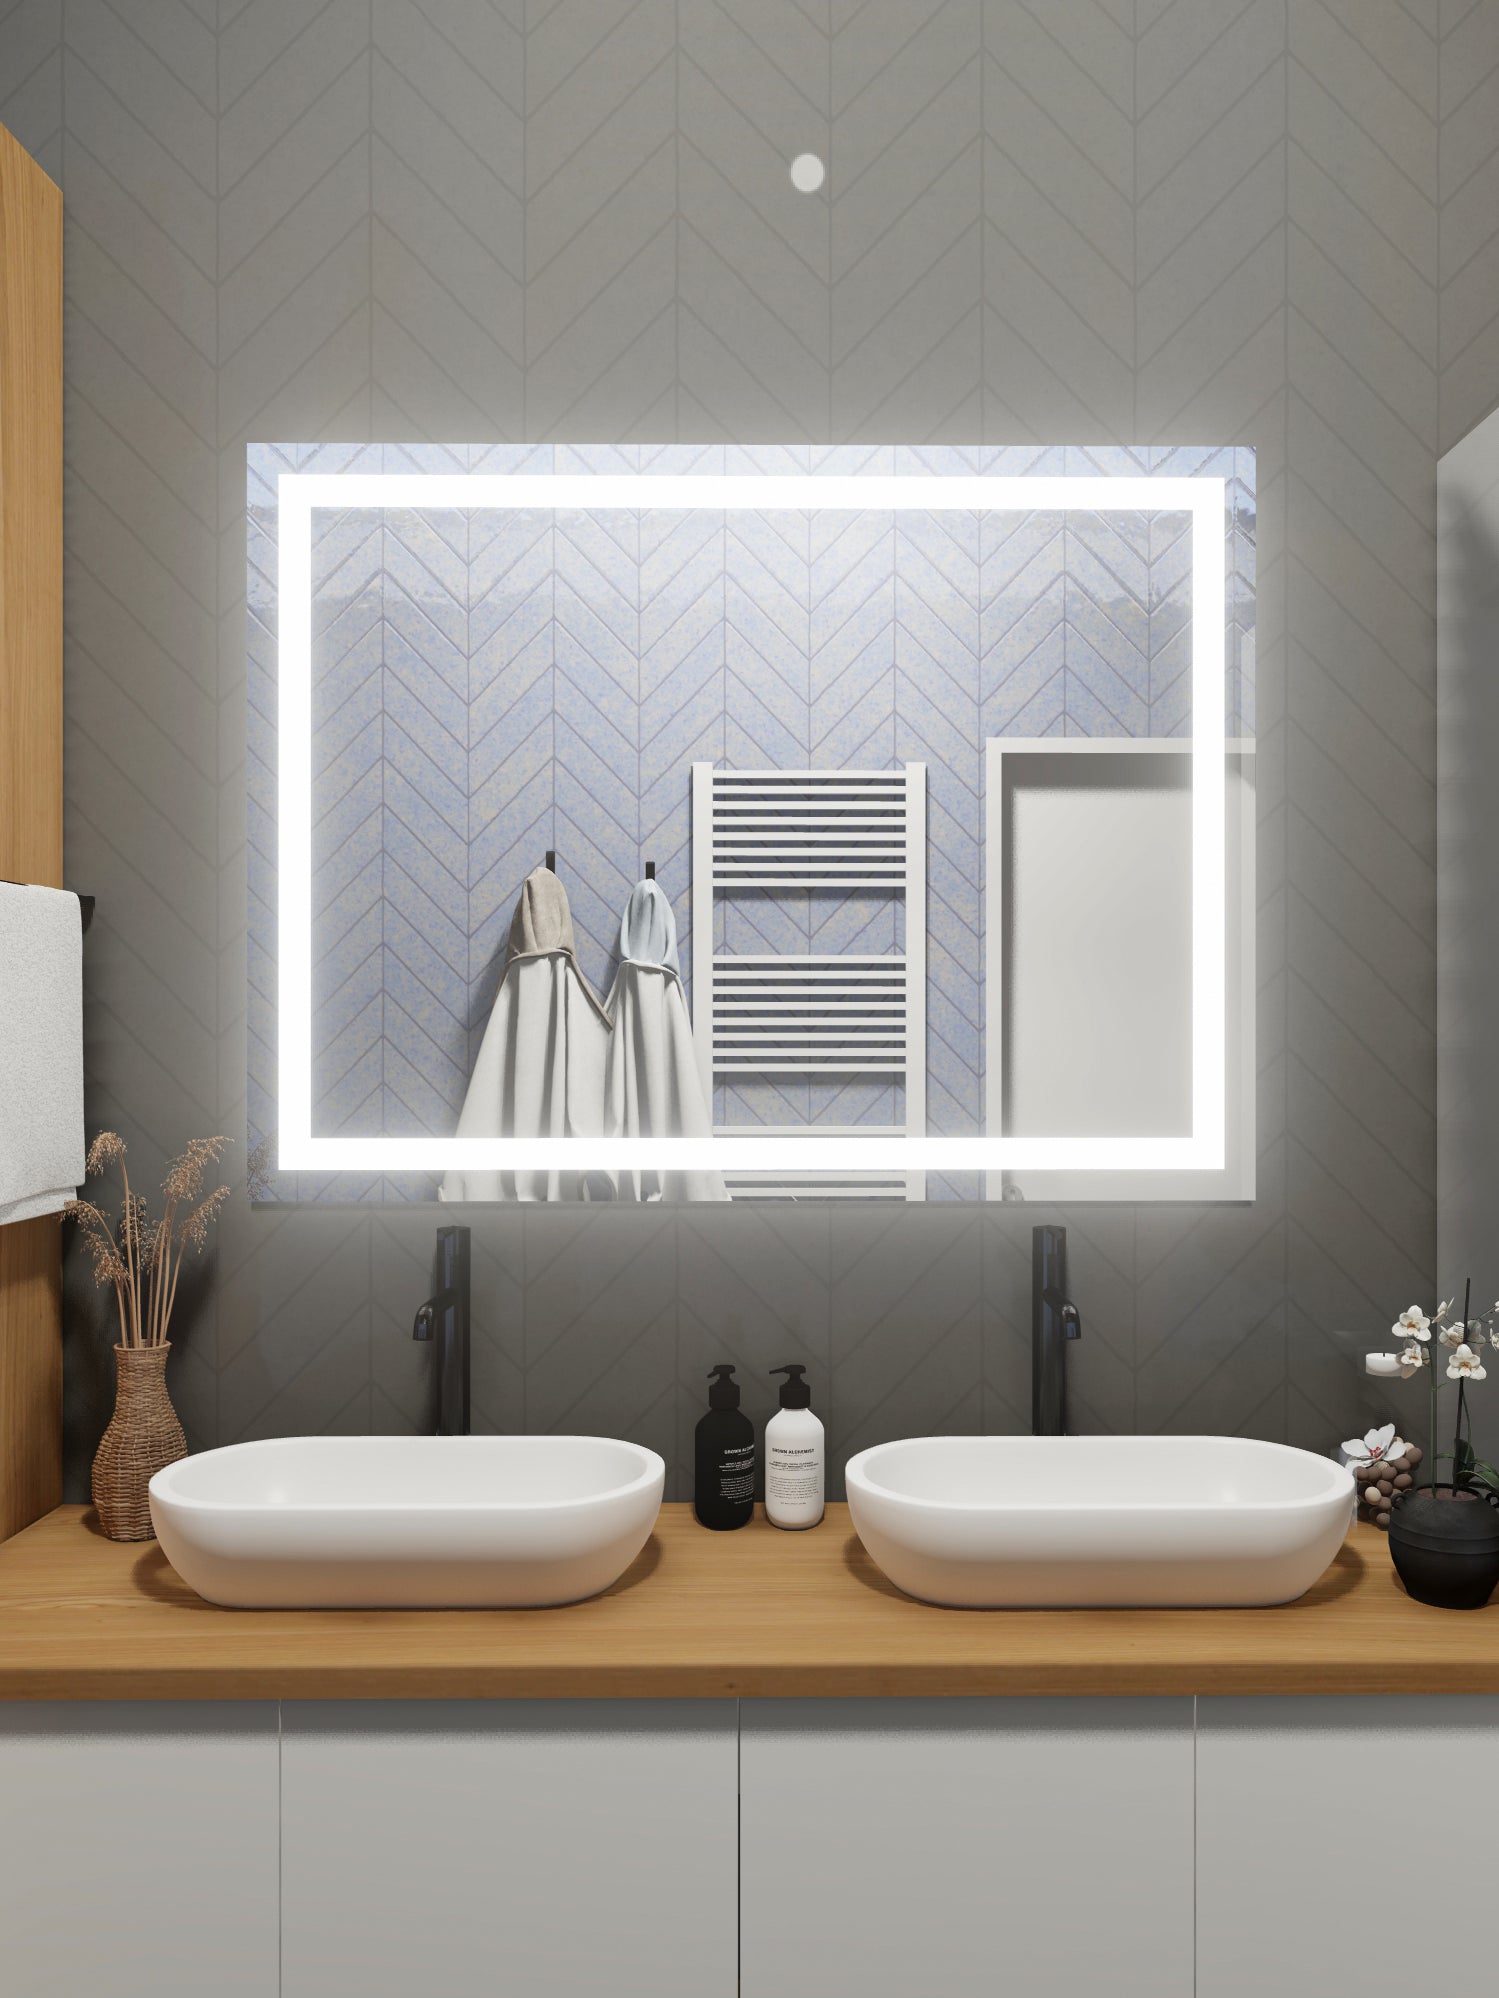 Front-Lighted LED Bathroom Vanity Mirror: 72" Wide x 36" Tall - Rectangular - Wall-Mounted